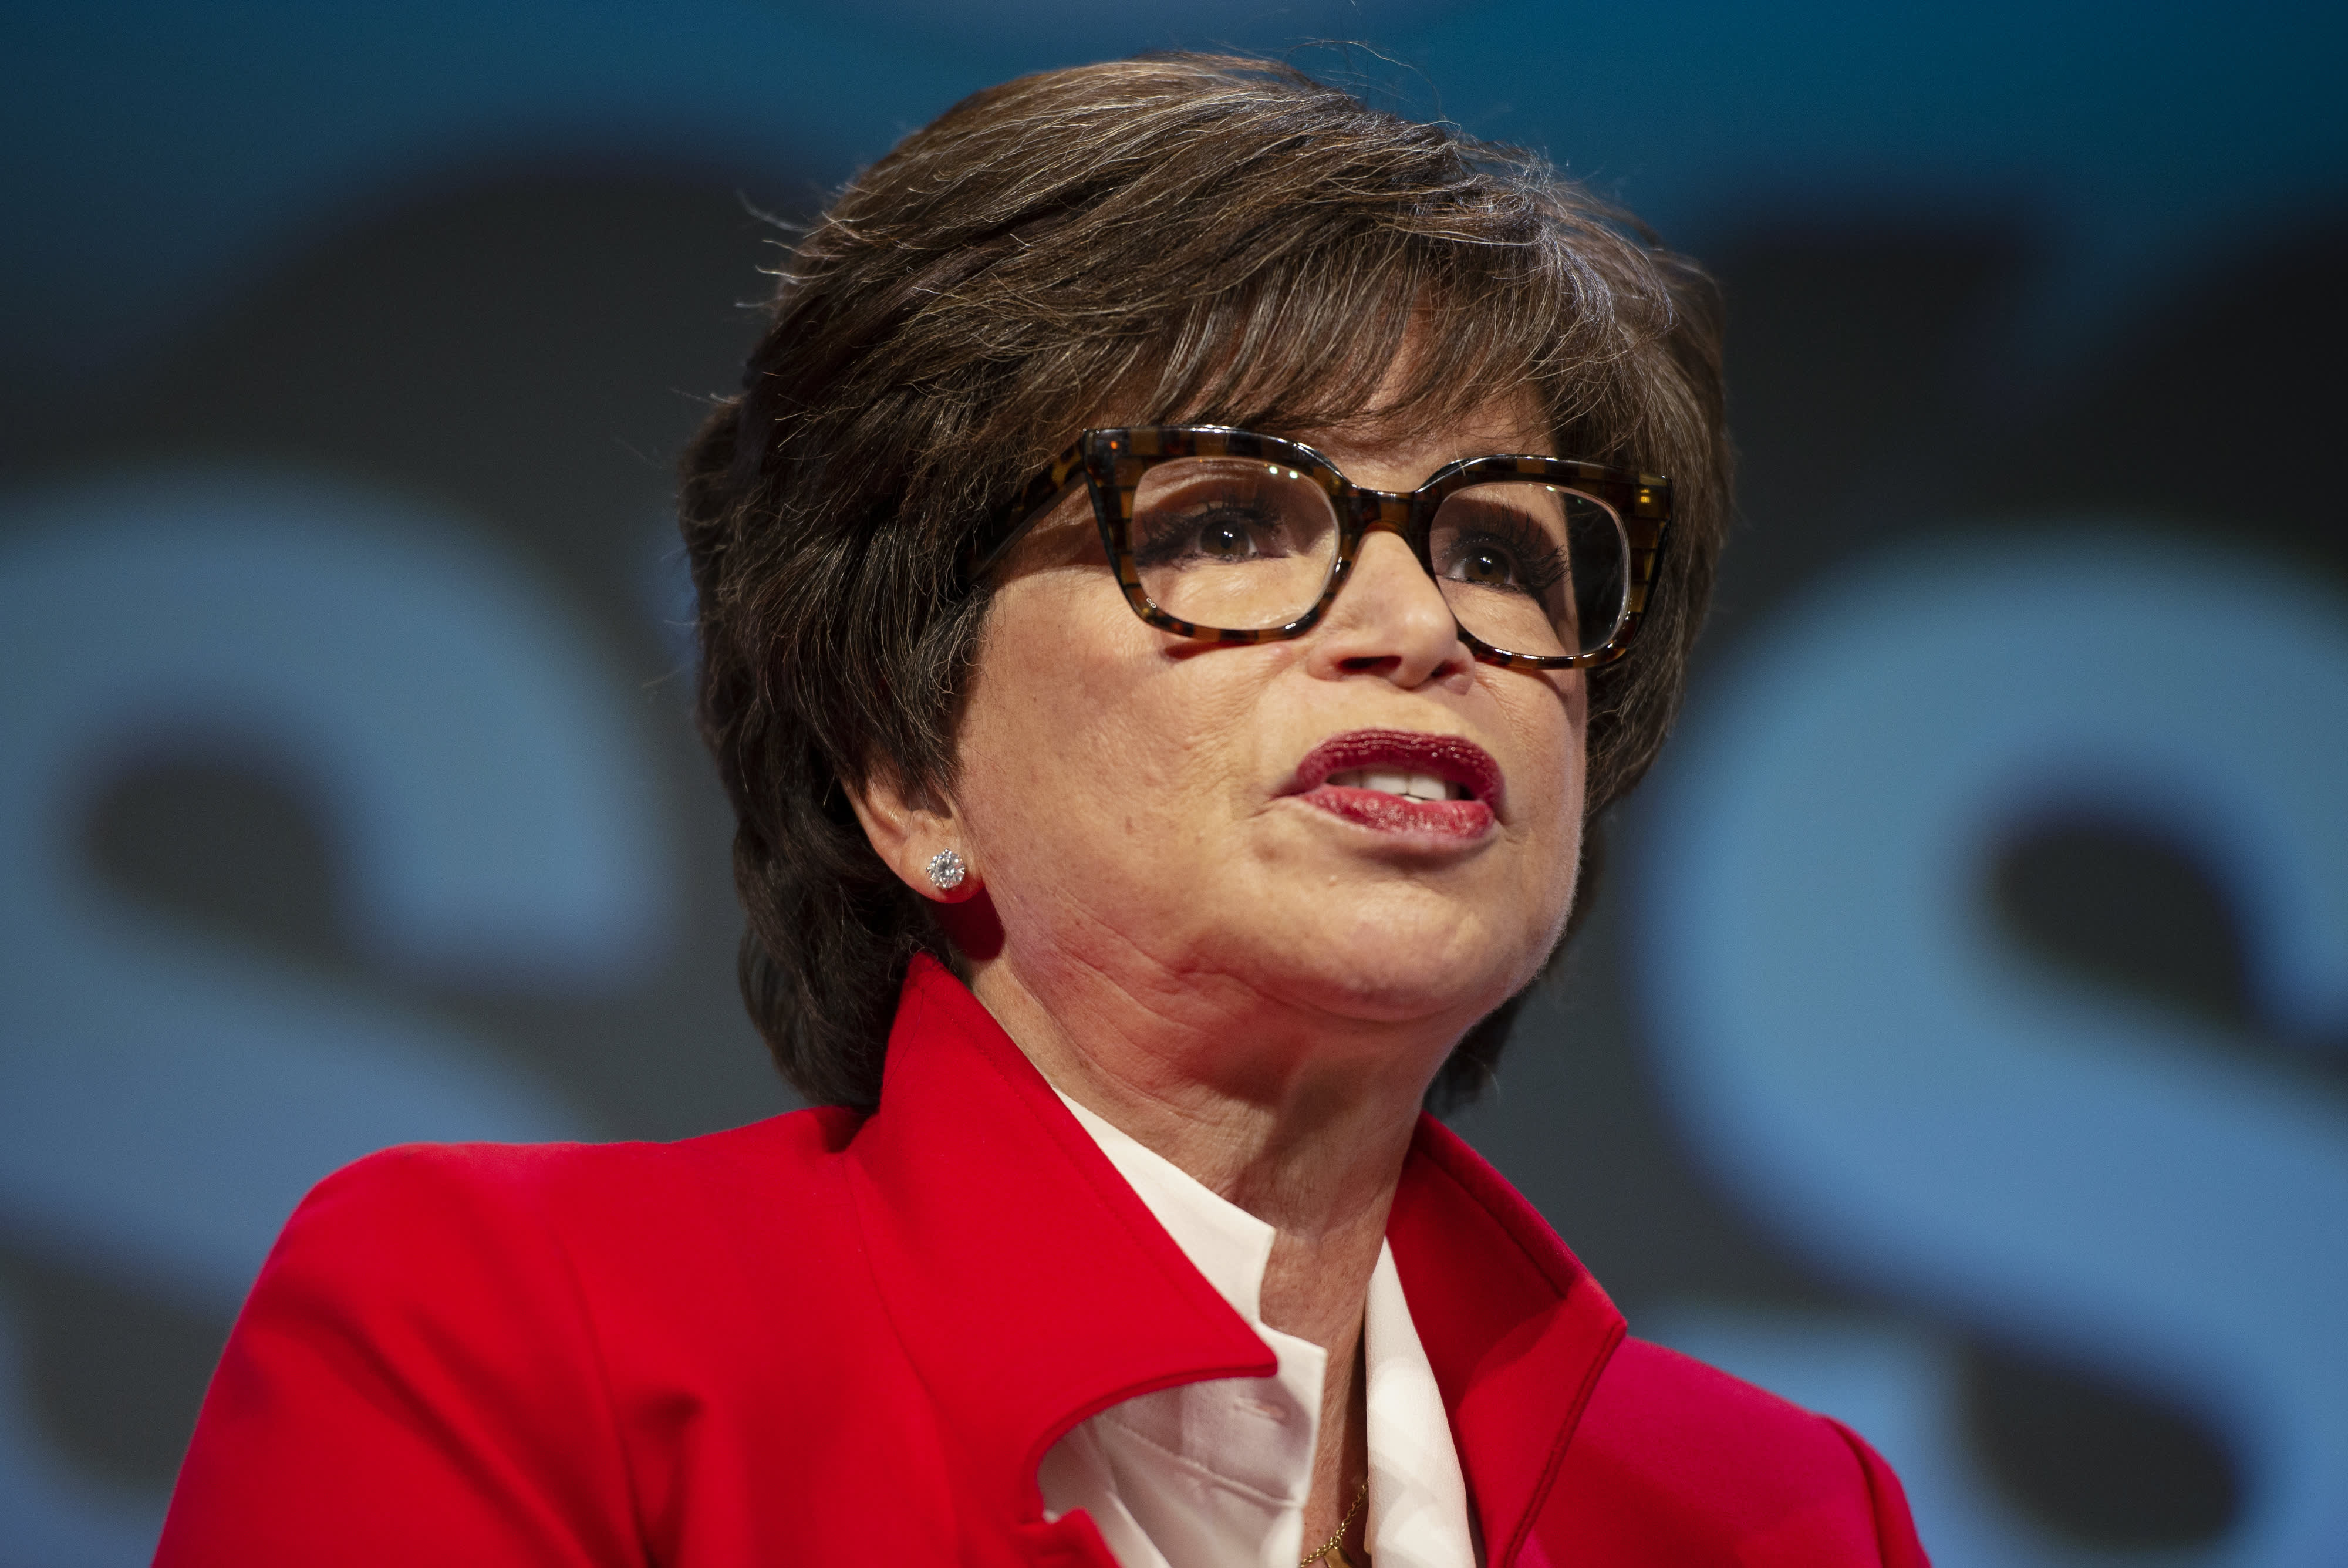 Valerie Jarrett is out talking about her life, Obama and the age of Trump